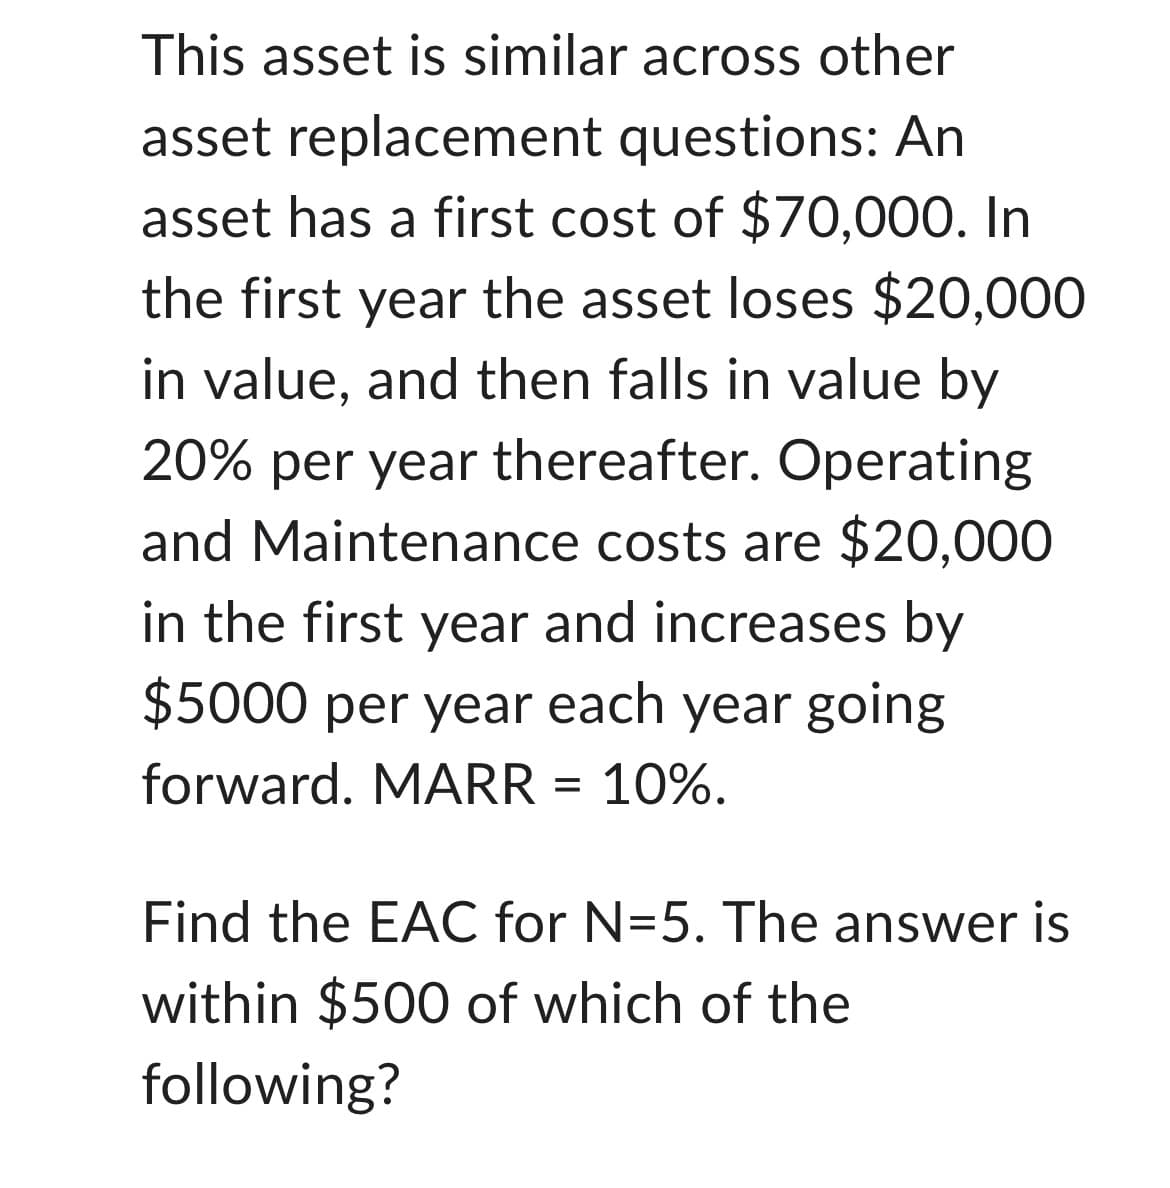 This asset is similar across other
asset replacement questions: An
asset has a first cost of $70,000. In
the first year the asset loses $20,000
in value, and then falls in value by
20% per year thereafter. Operating
and Maintenance costs are $20,000
in the first year and increases by
$5000 per year each year going
forward. MARR = 10%.
Find the EAC for N=5. The answer is
within $500 of which of the
following?